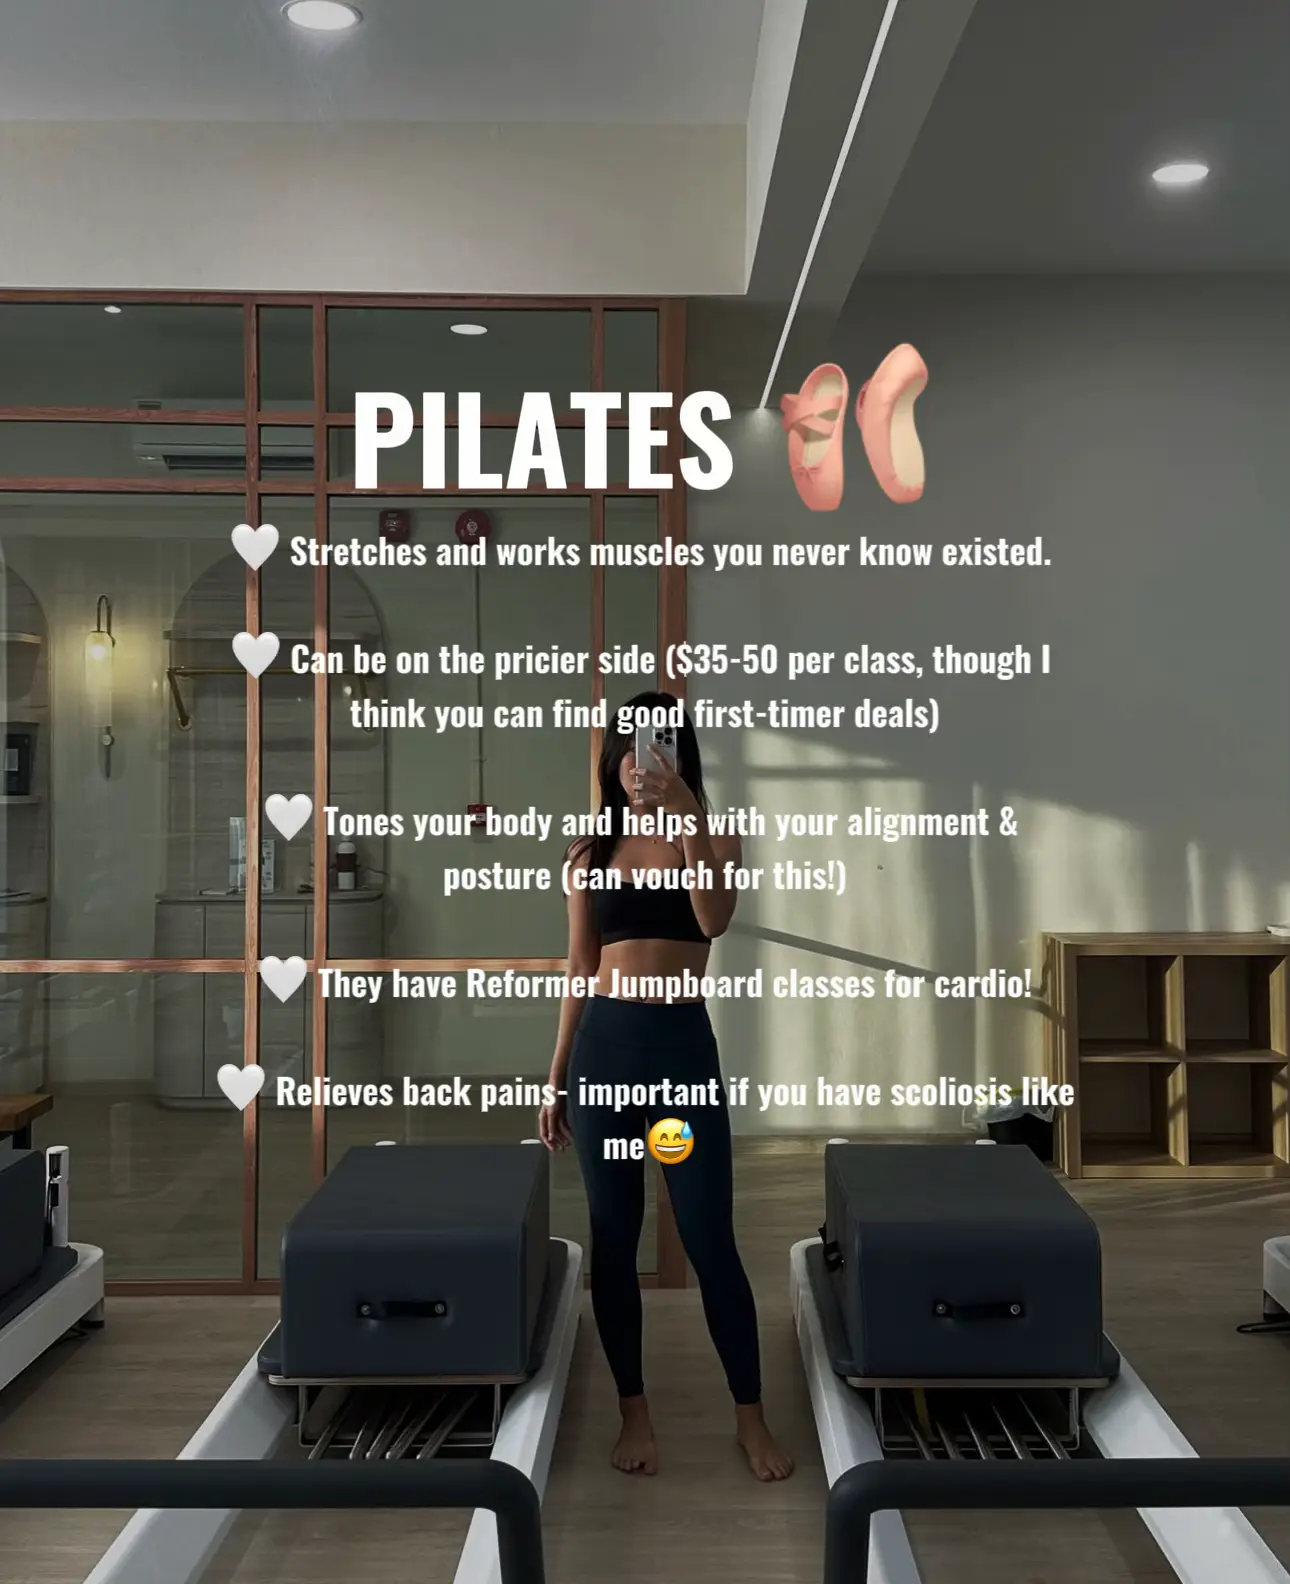 10 Minute Pilates Workout for More Energy! 